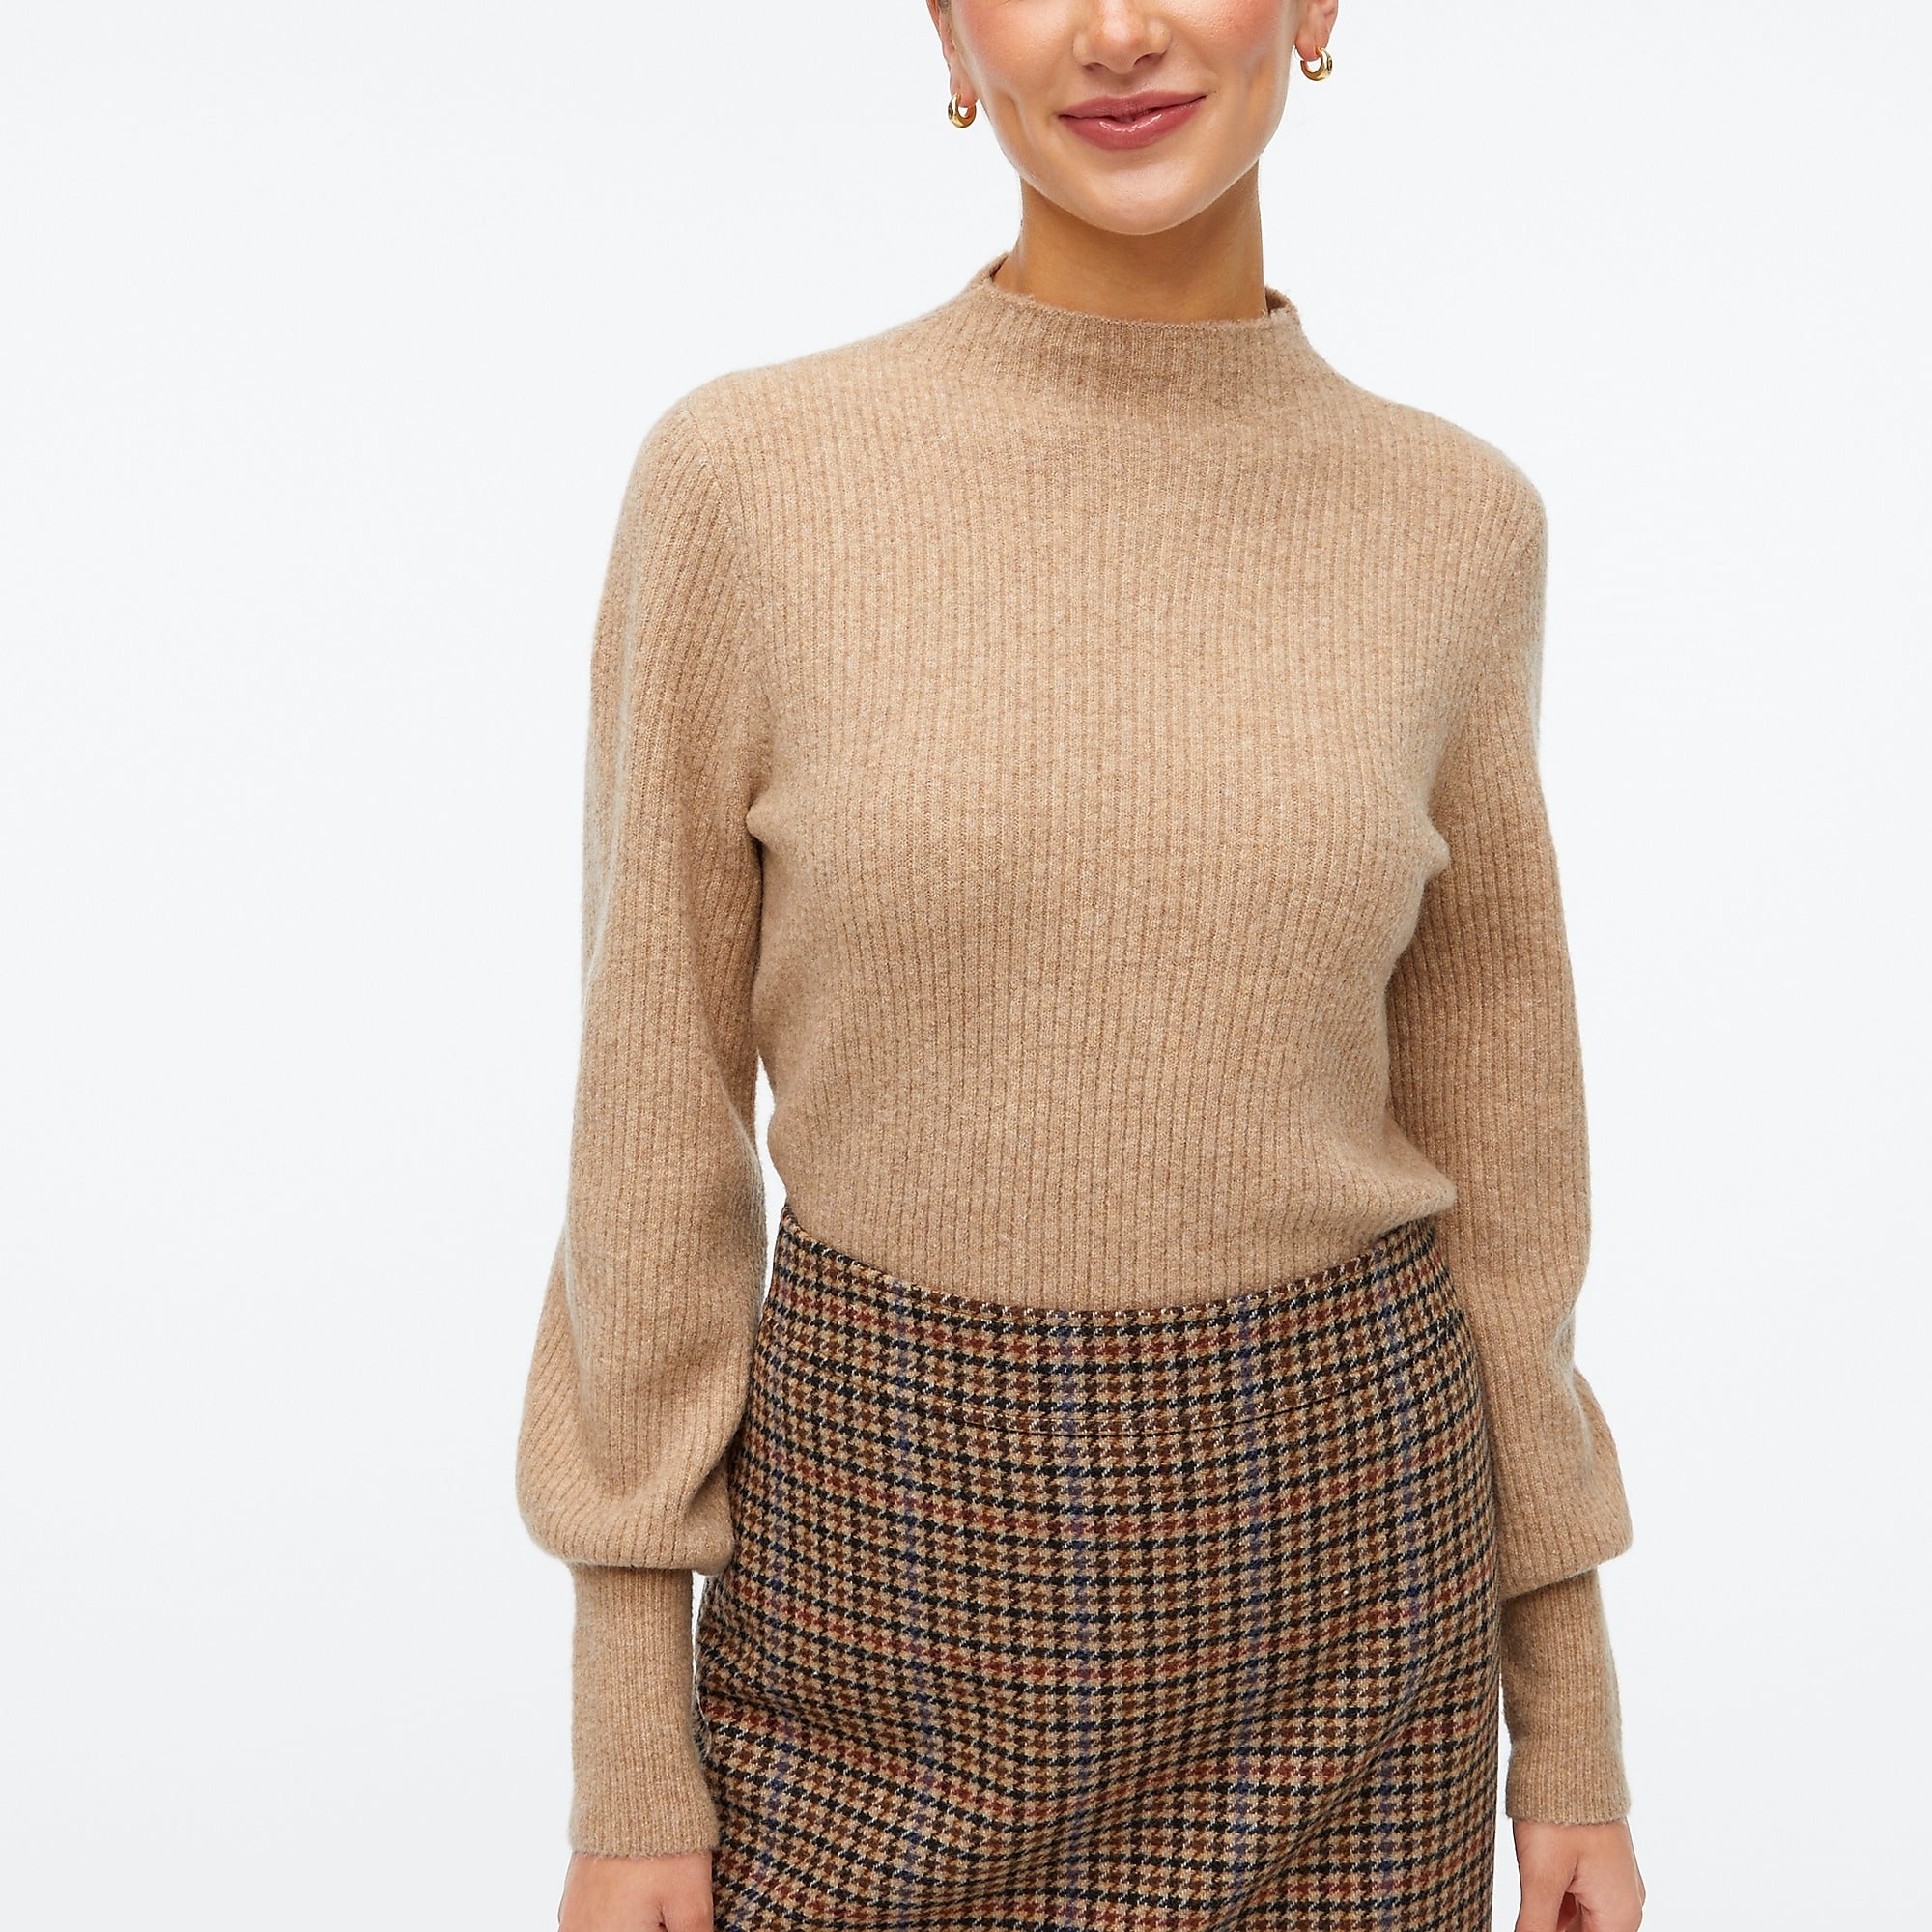 Model wearing tan mock neck sweater with tan,red, and black skirt